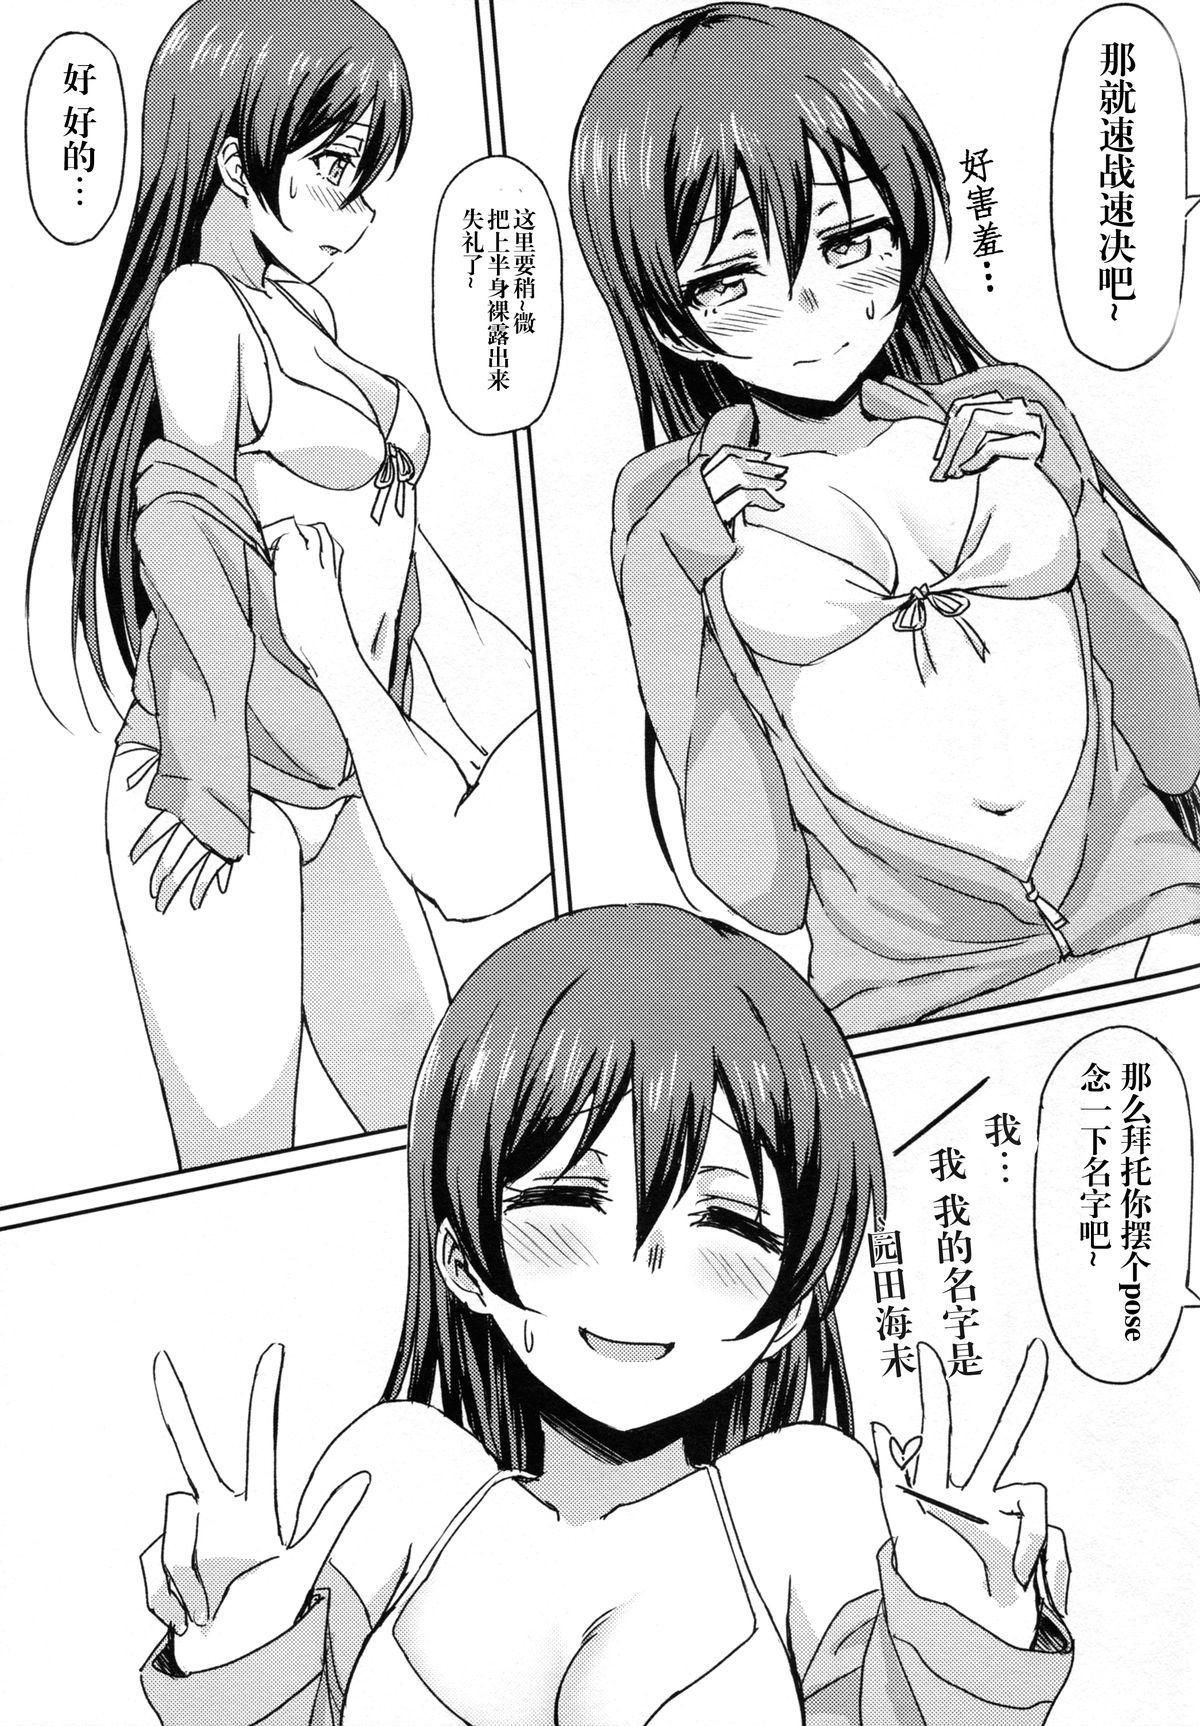 Jav Hah,Wrench This! - Love live Cash - Page 8